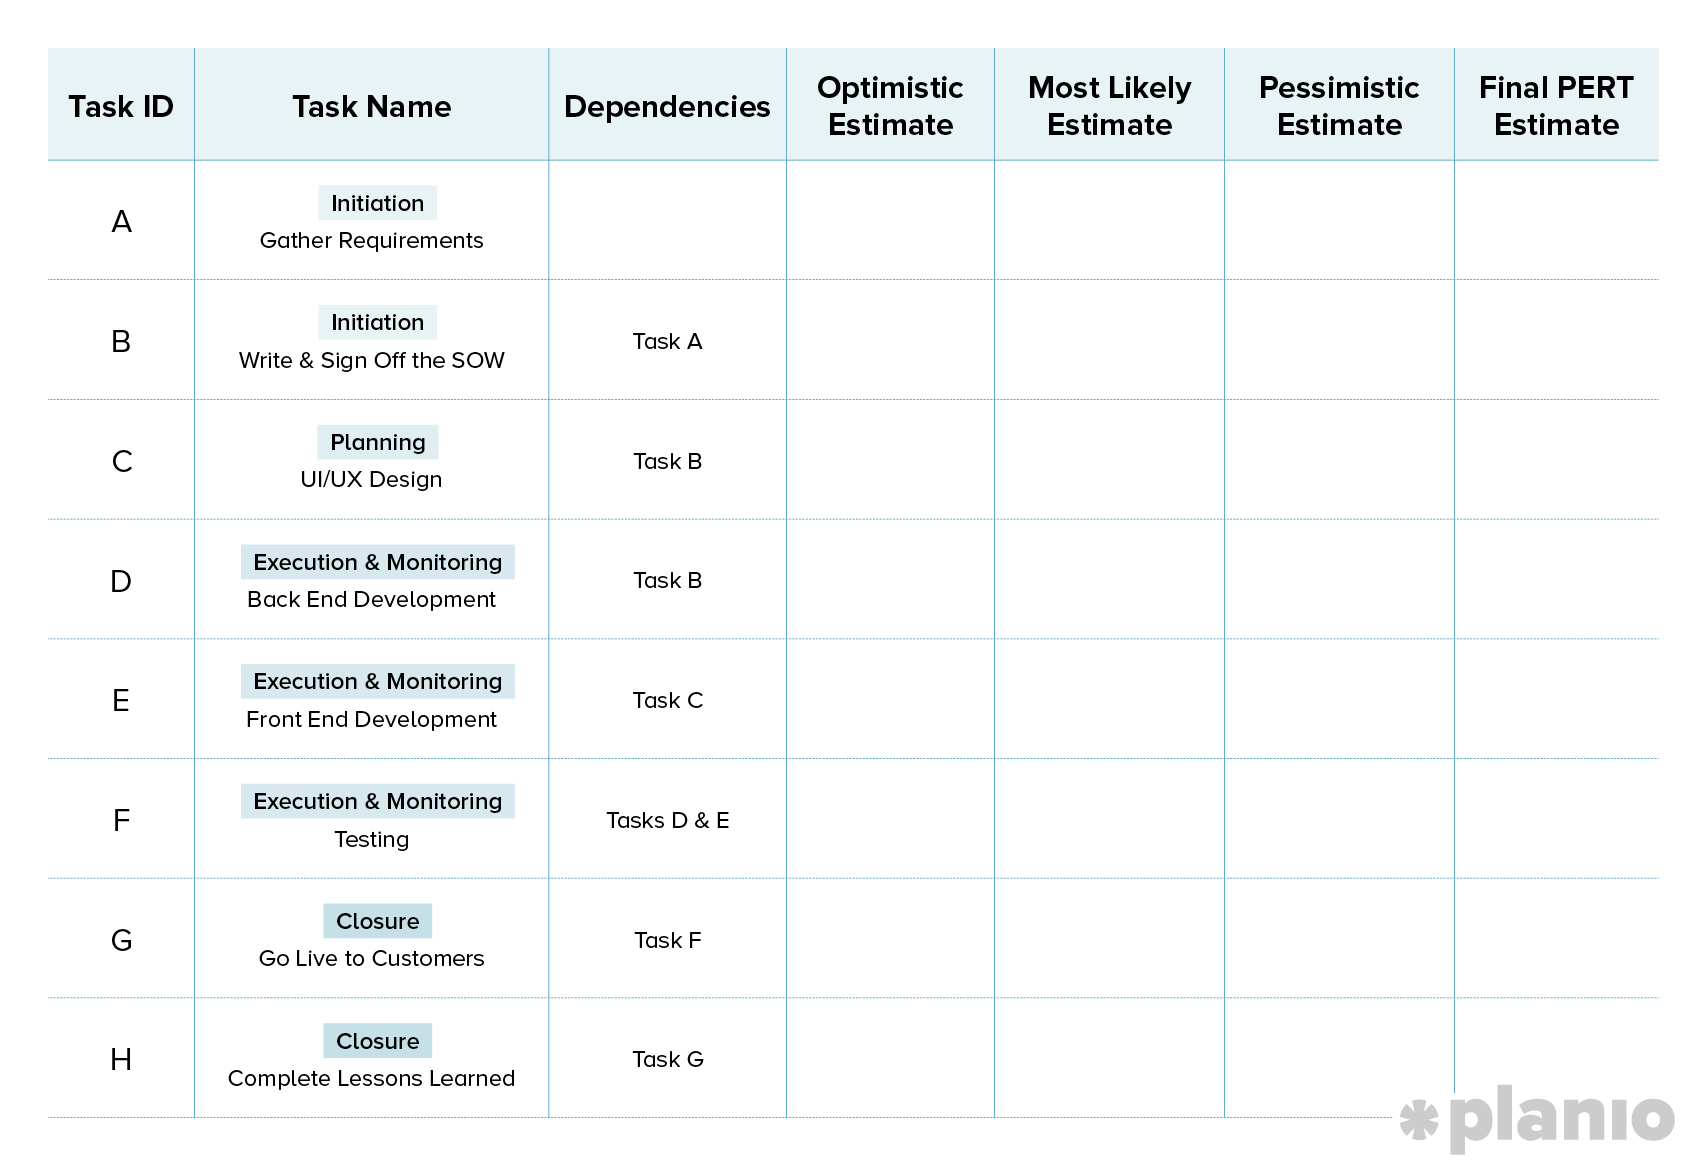 PERT table showing the dependencies of the tasks